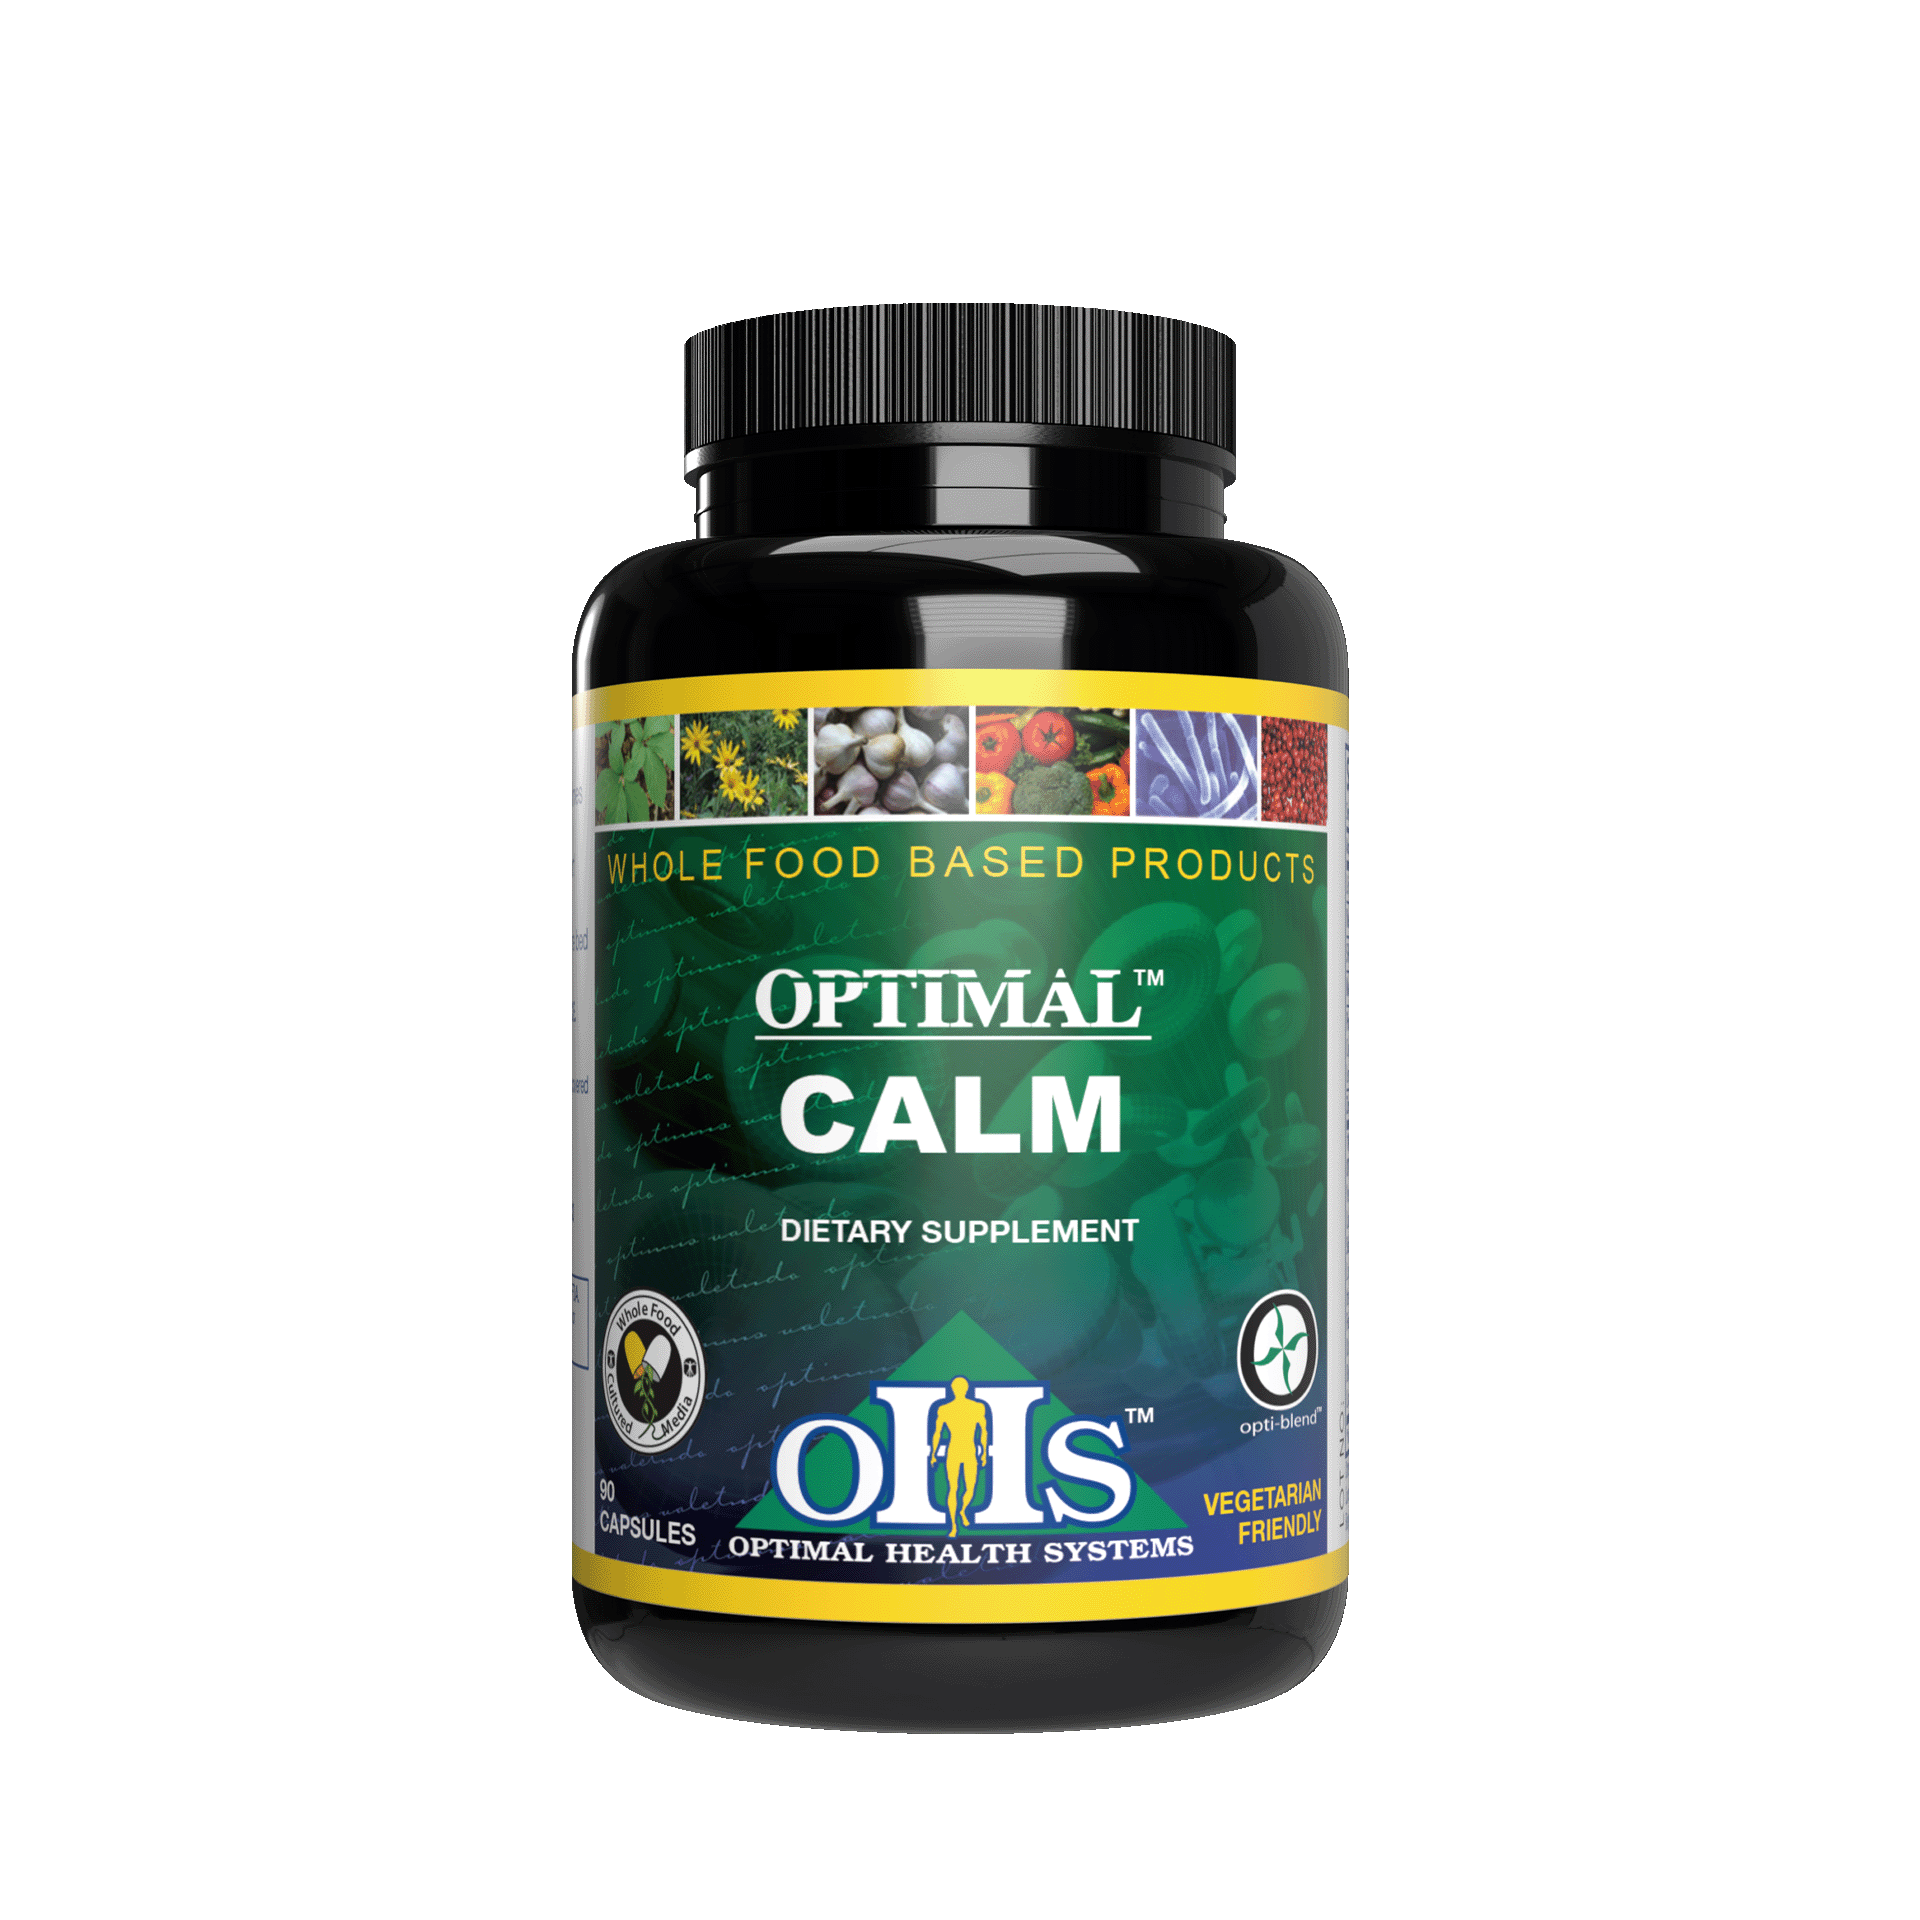 Image of a bottle of Optimal Calm.